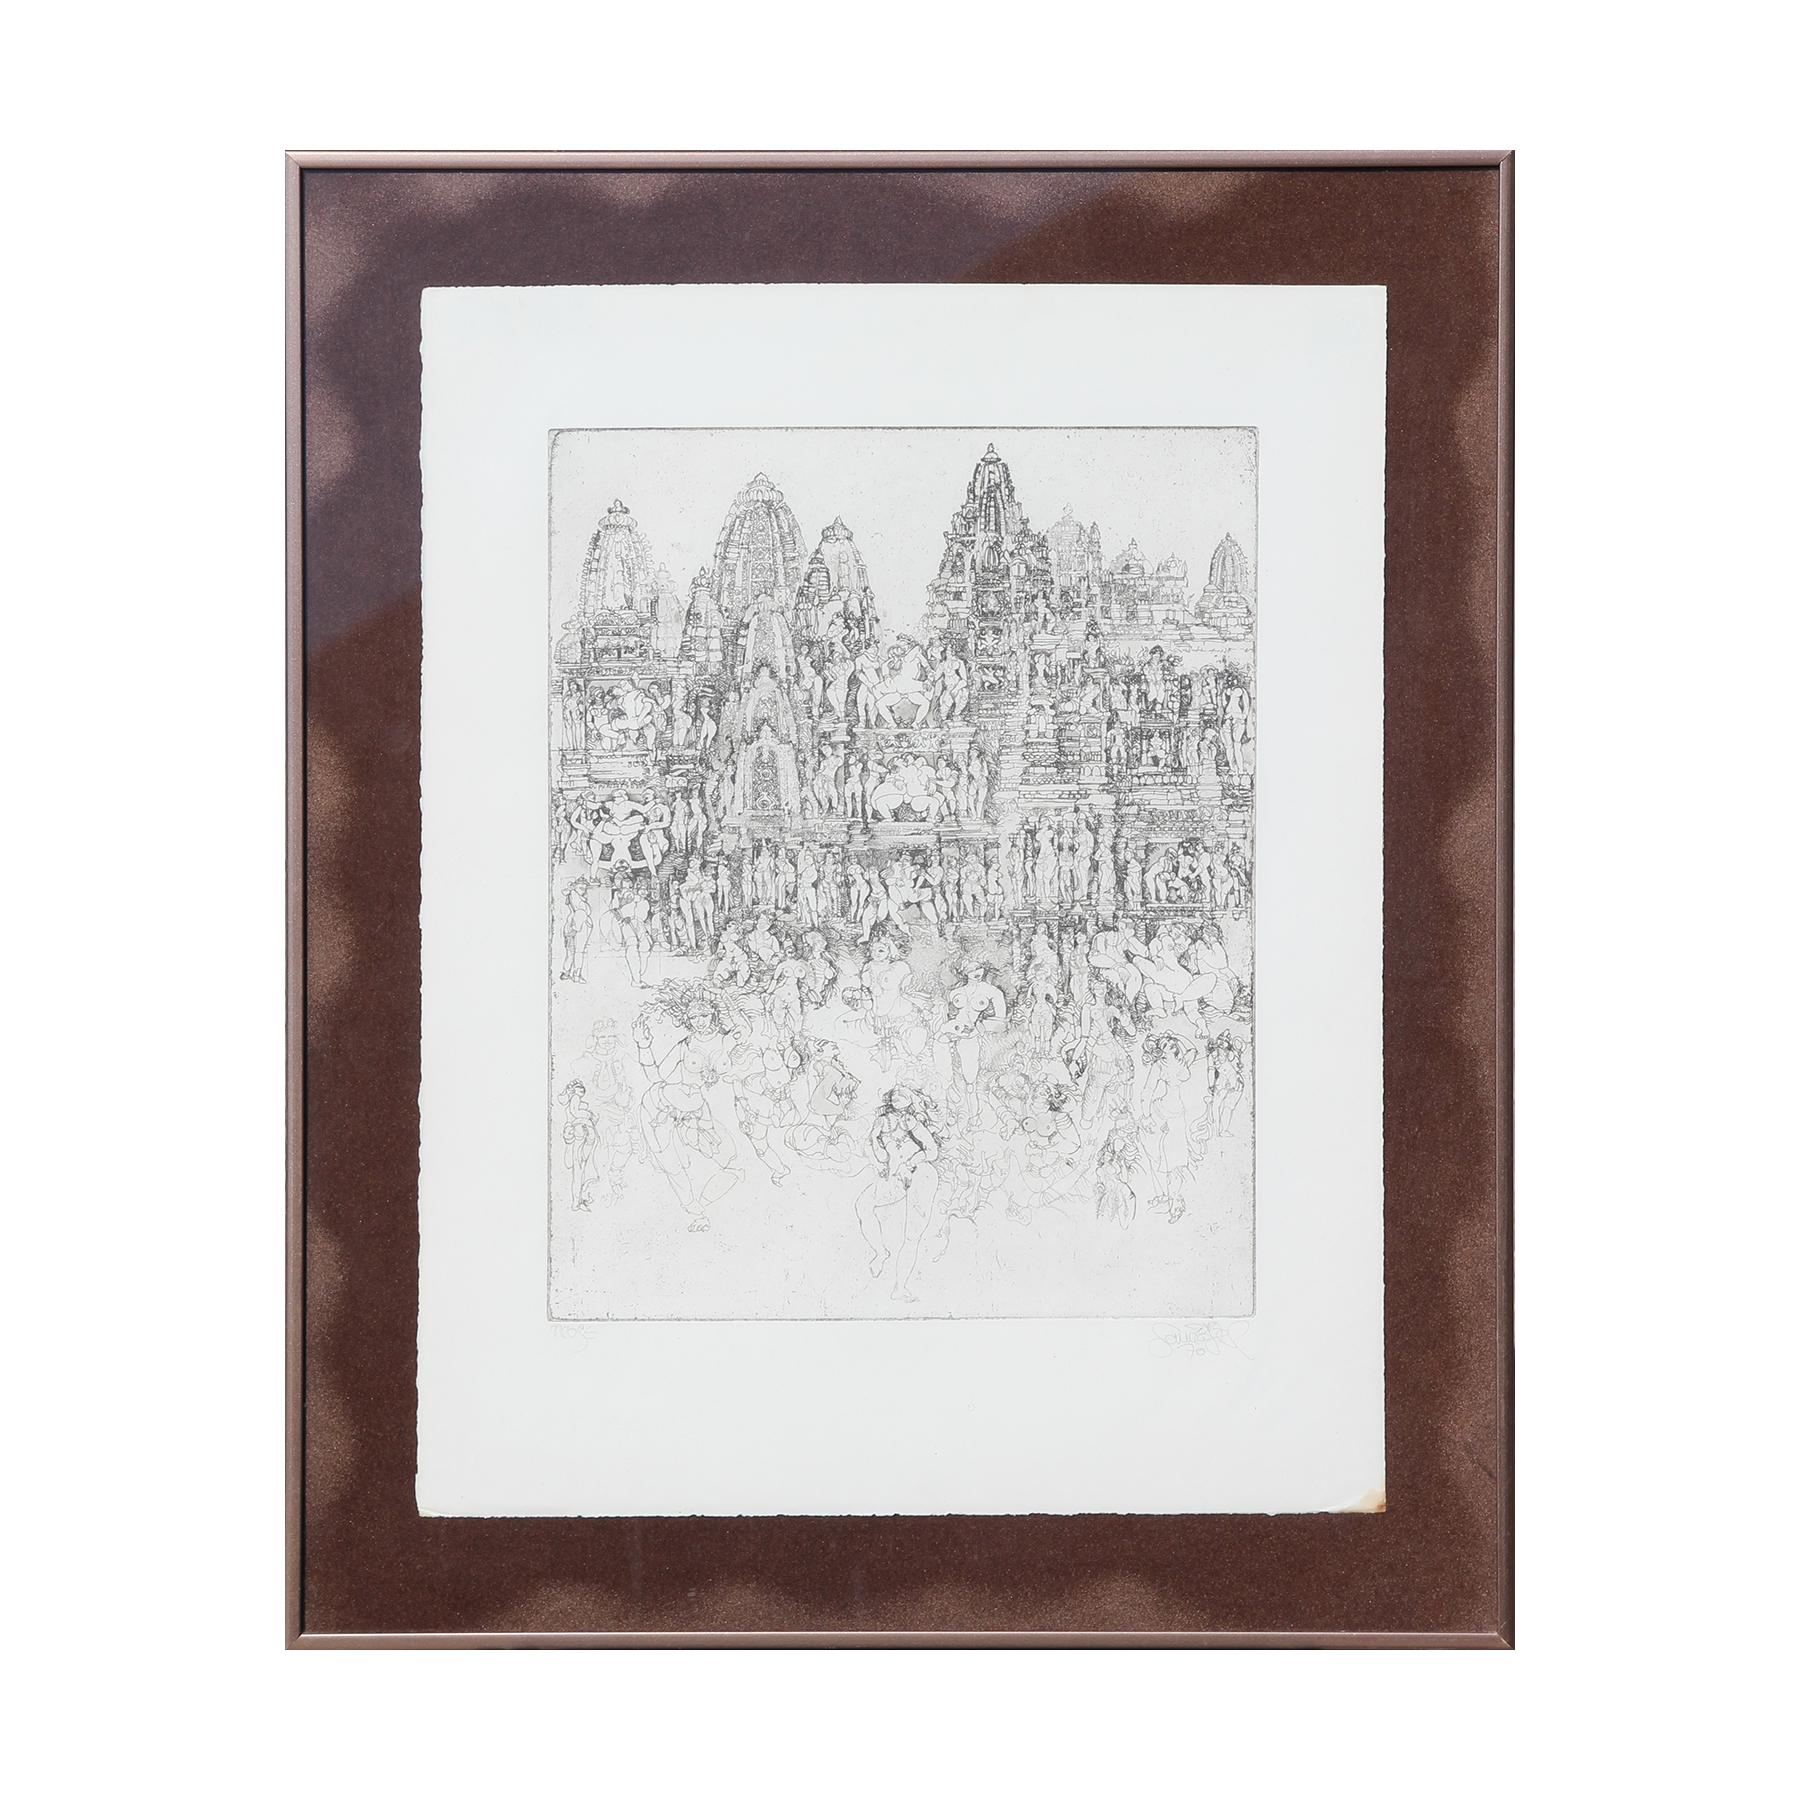 Jorg Schmeisser Figurative Print - Naturalistic Print Etching of the Khajuraho Indian Heritage Site Monuments